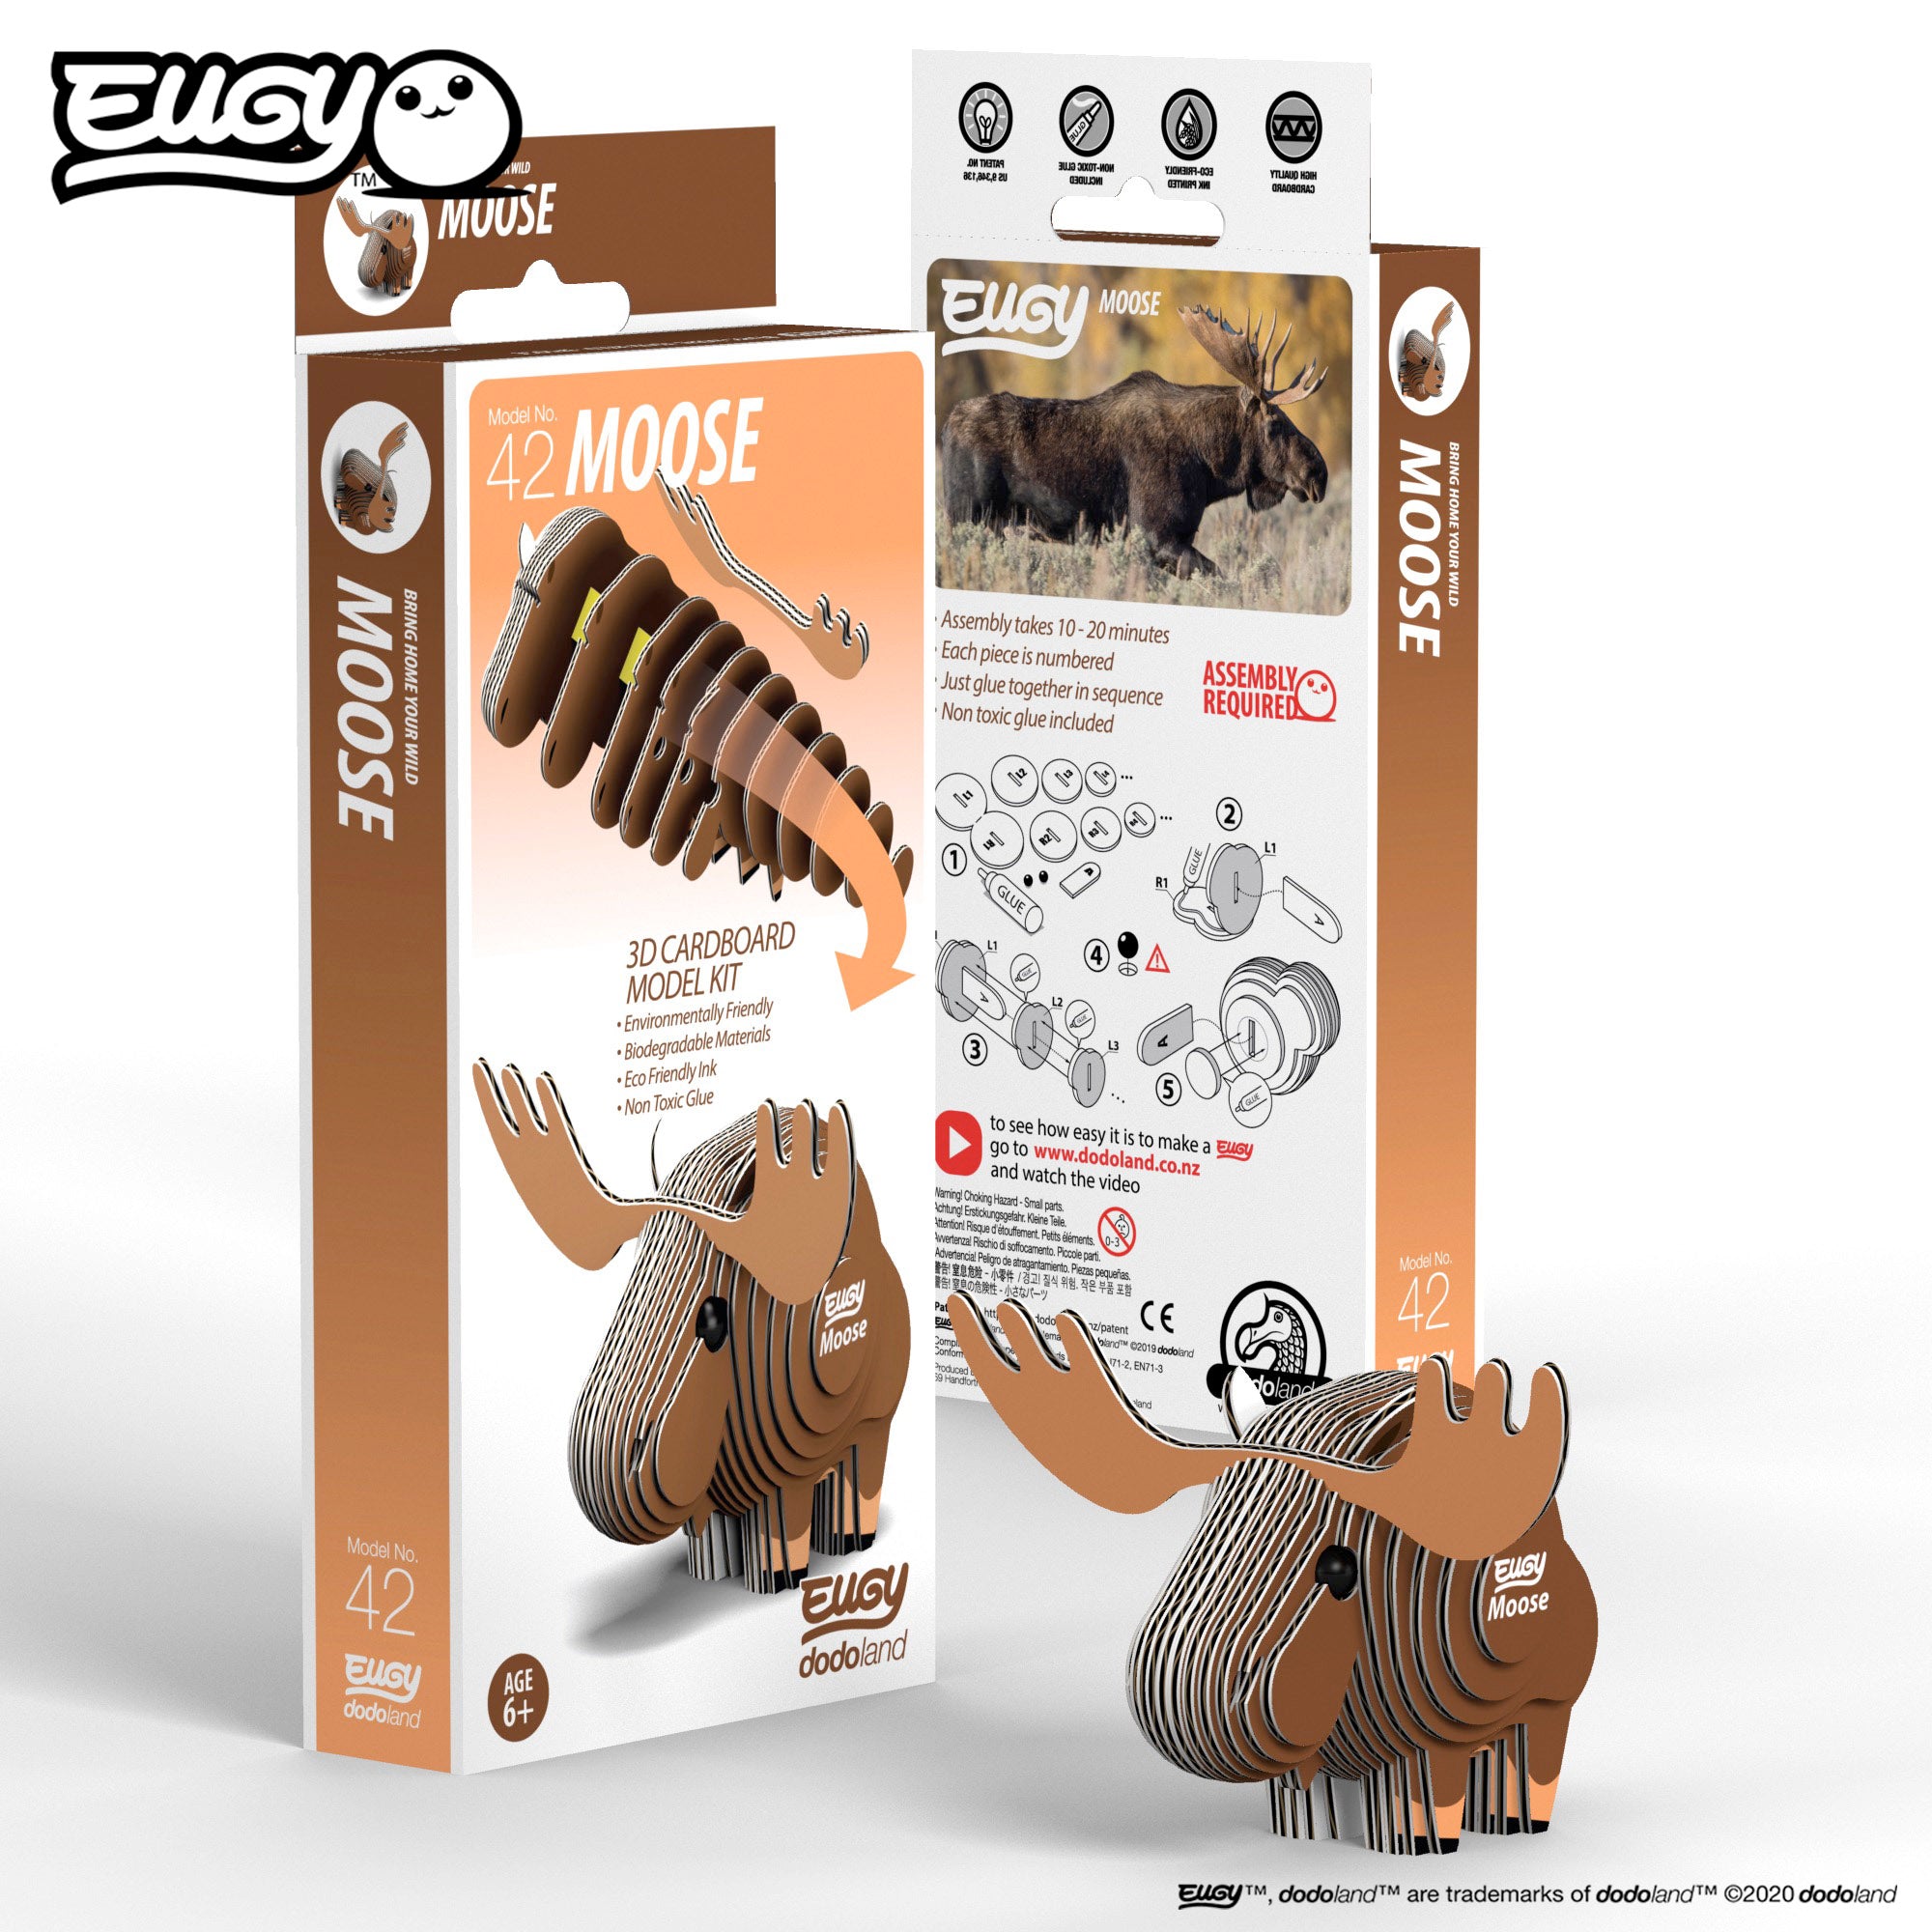 Image of an EUGY Moose, looking left in front two EUGY Kangaroo Boxes, 1 showing the front cover and the other showing the rear of the box, against a white background